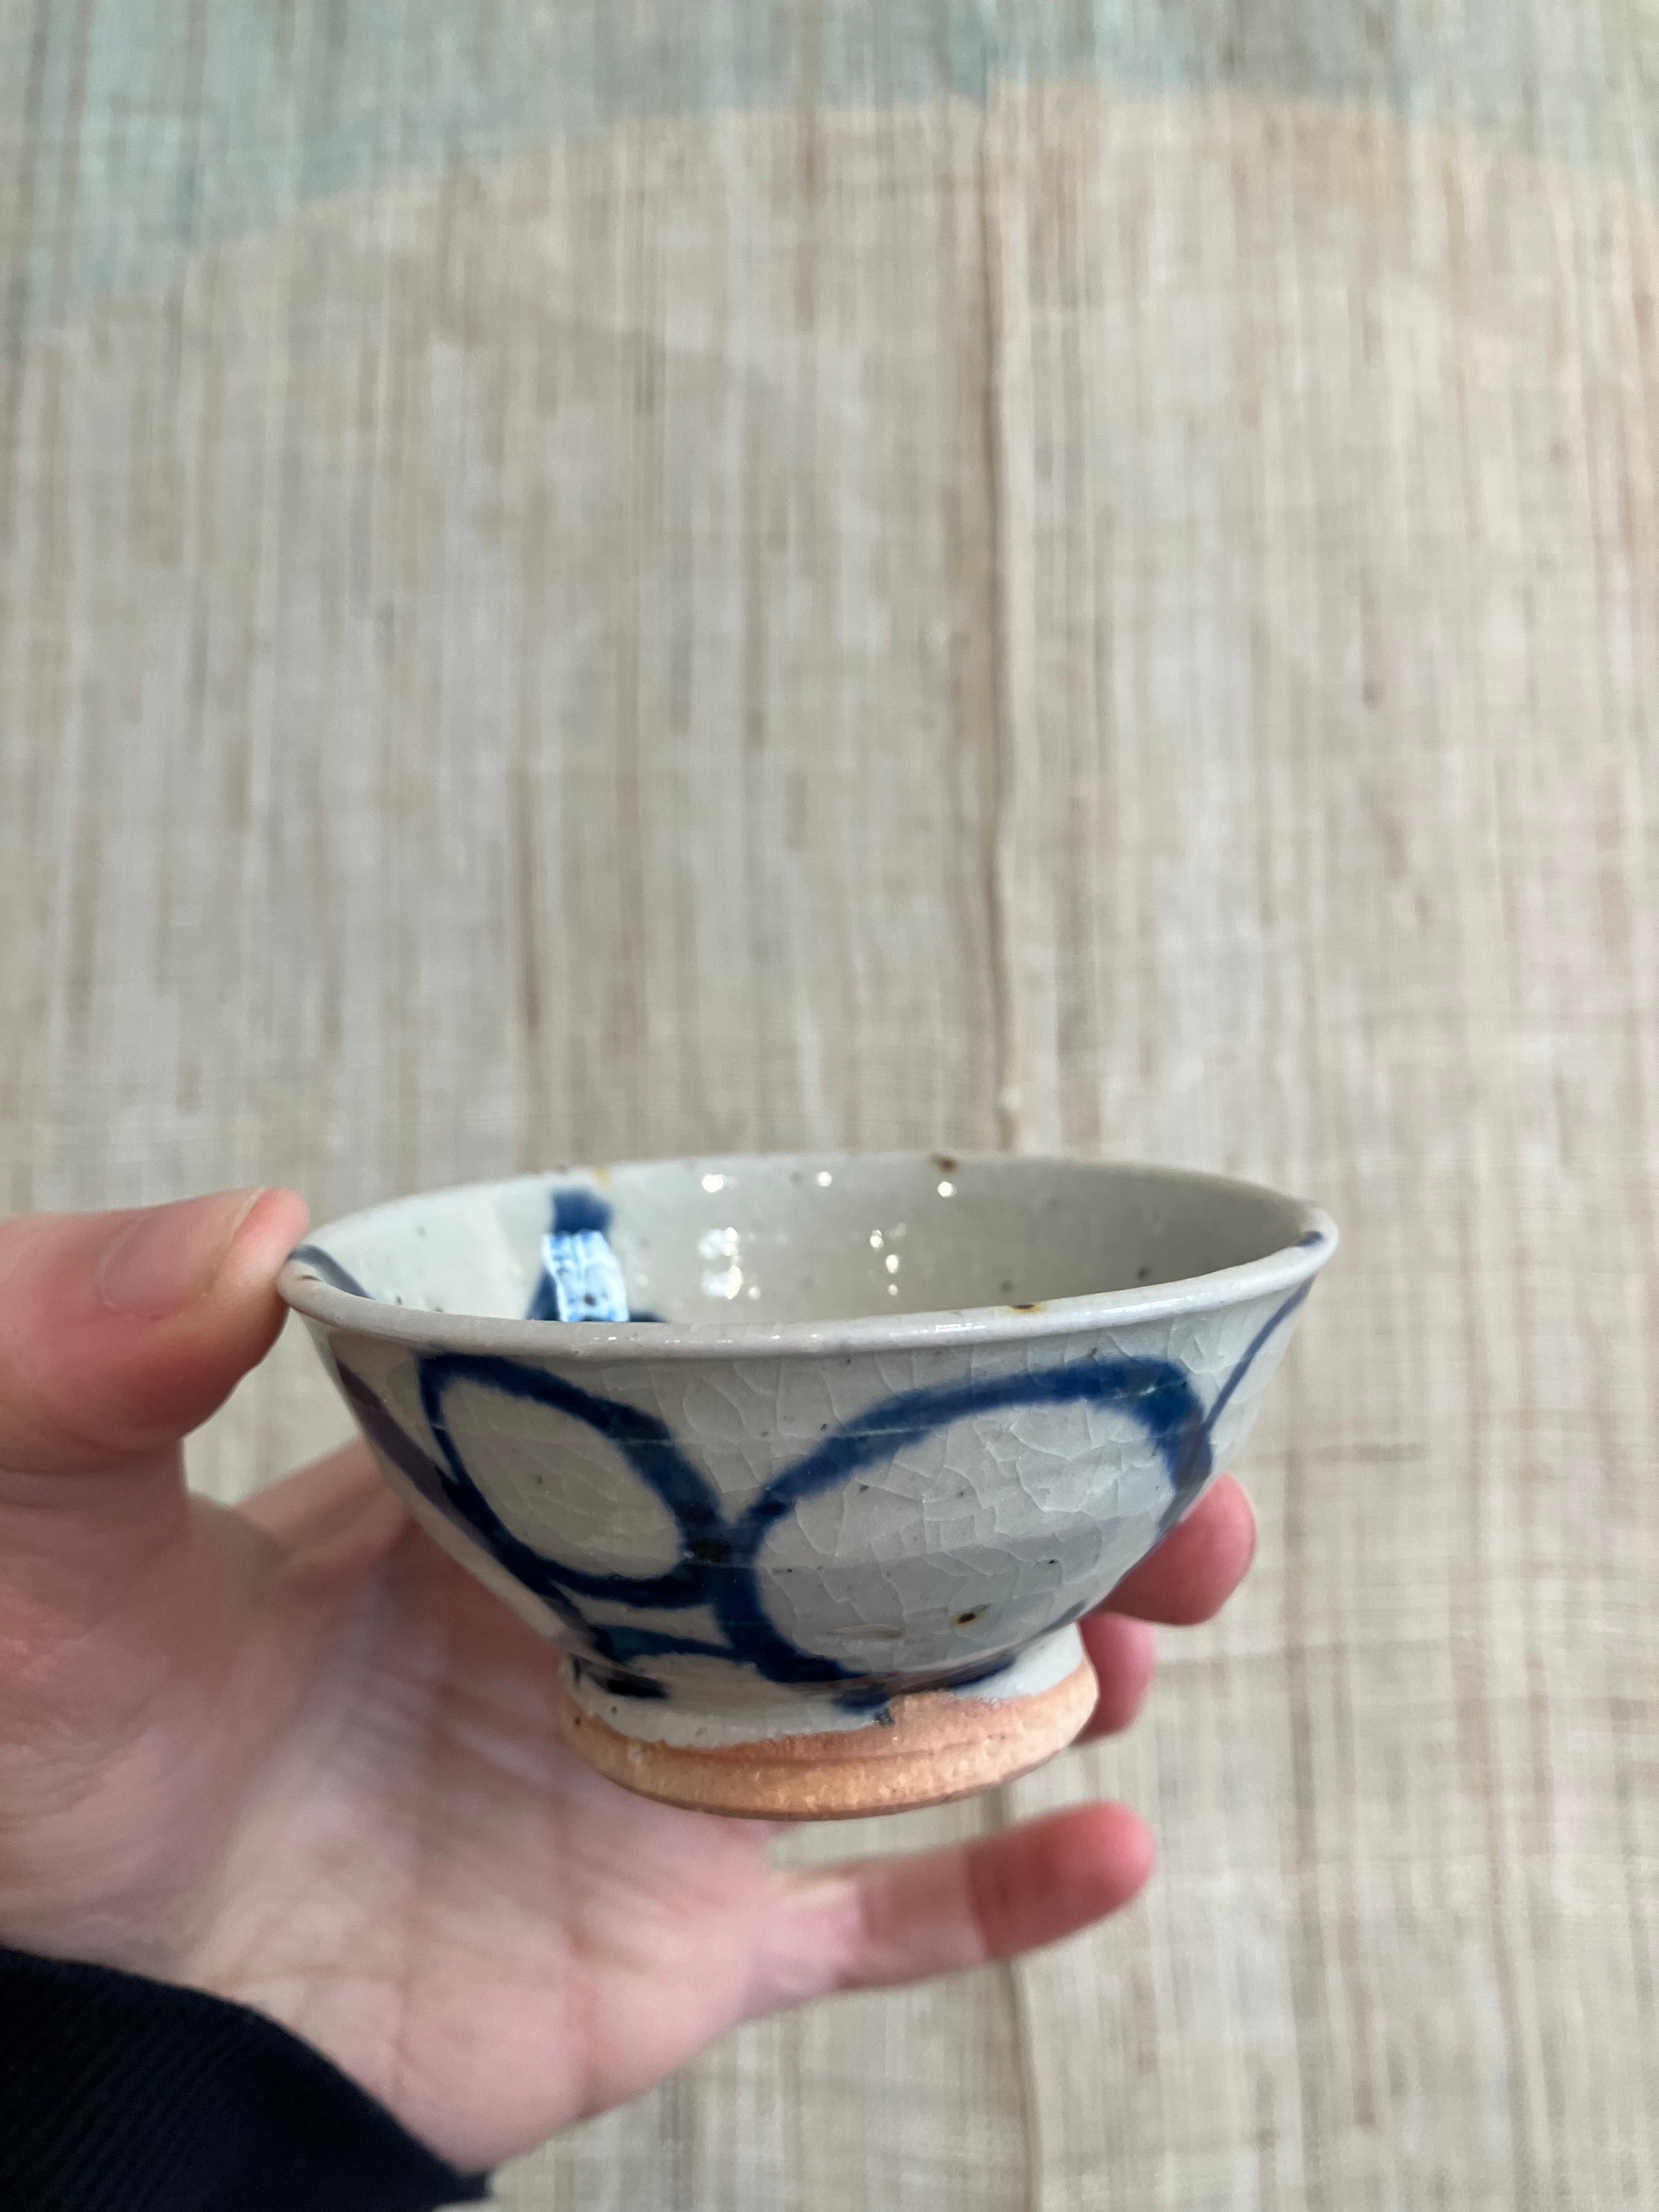 Sake cup sand colored glaze and blue spiral pattern